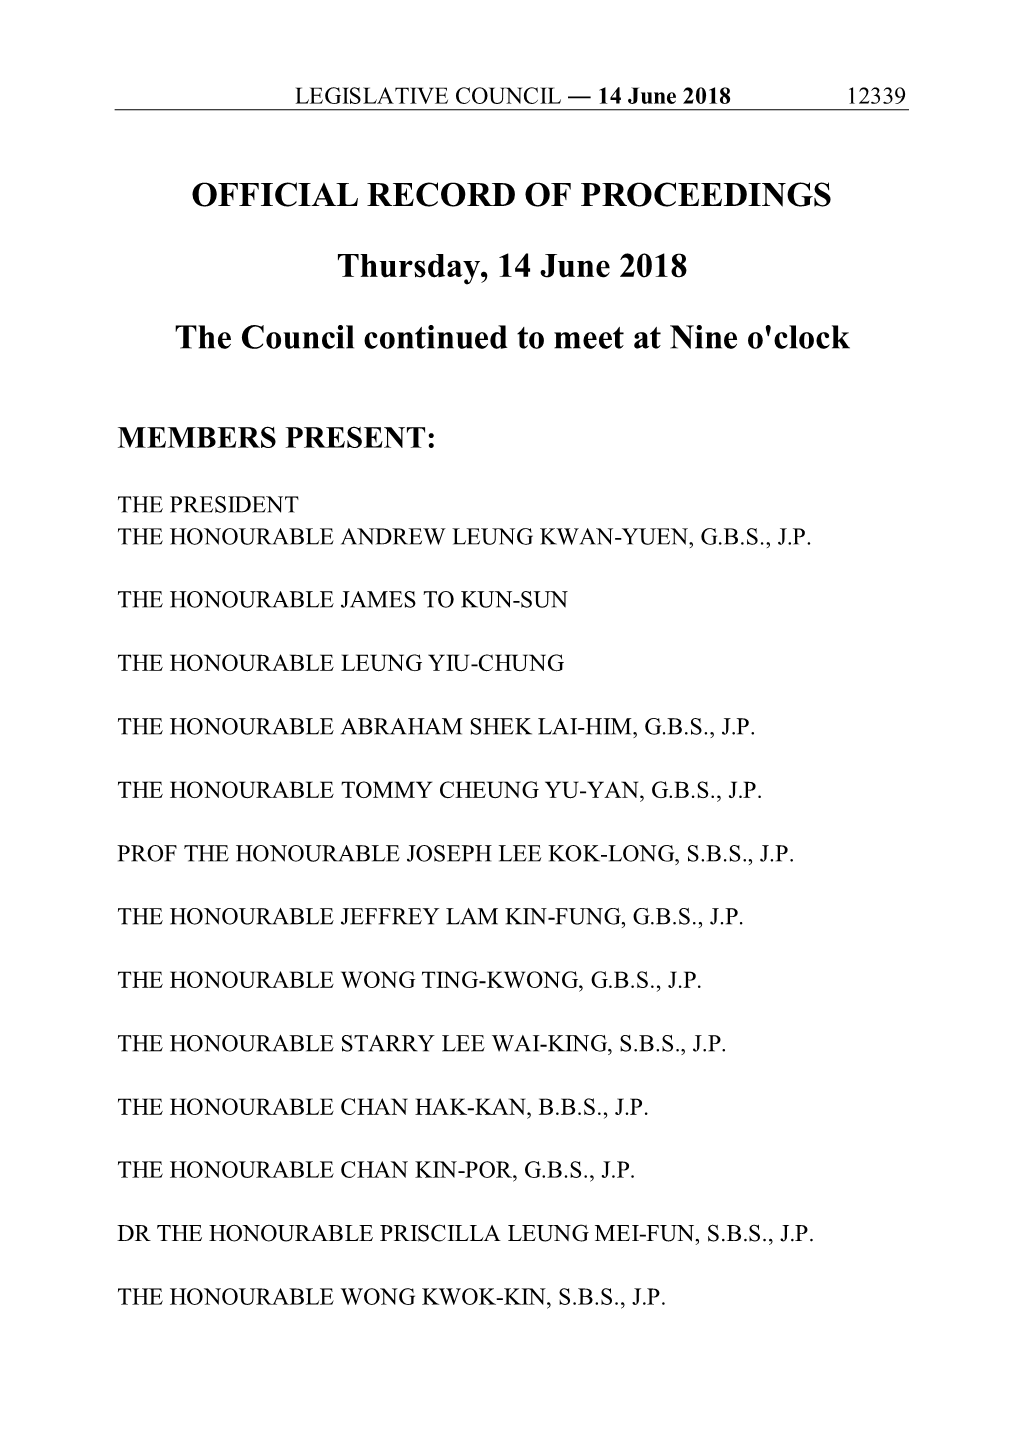 OFFICIAL RECORD of PROCEEDINGS Thursday, 14 June